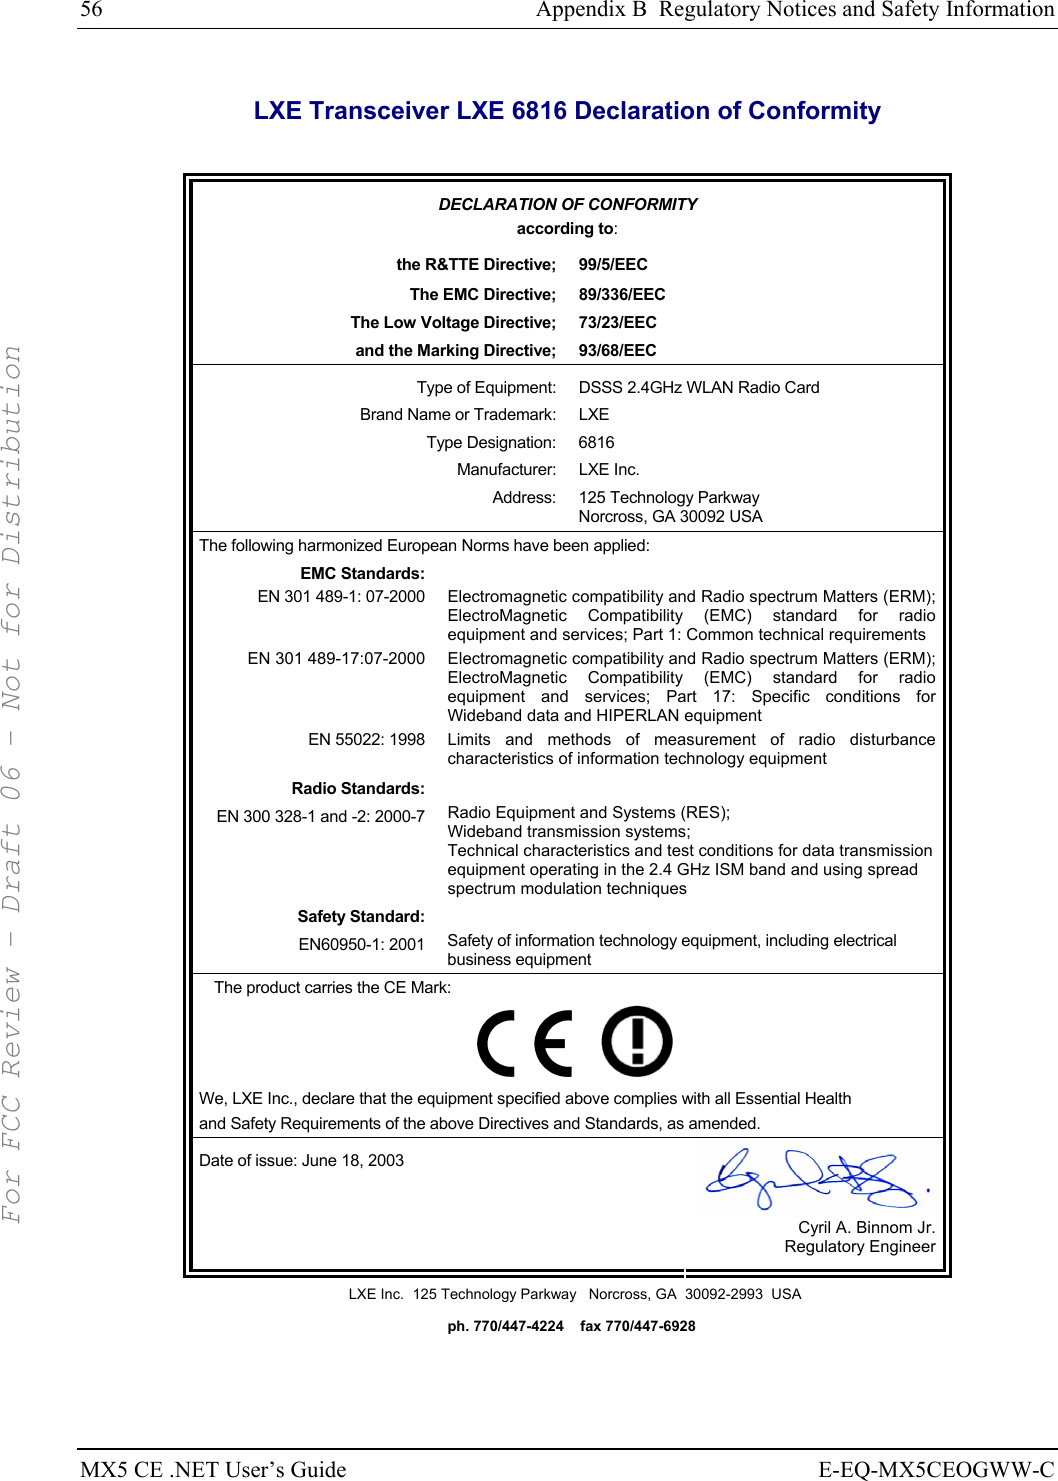 56  Appendix B  Regulatory Notices and Safety Information MX5 CE .NET User’s Guide  E-EQ-MX5CEOGWW-C LXE Transceiver LXE 6816 Declaration of Conformity  DECLARATION OF CONFORMITY according to: the R&amp;TTE Directive;  99/5/EEC The EMC Directive;  89/336/EEC The Low Voltage Directive;  73/23/EEC and the Marking Directive;  93/68/EEC Type of Equipment:  DSSS 2.4GHz WLAN Radio Card Brand Name or Trademark:  LXE Type Designation:  6816 Manufacturer: LXE Inc. Address:  125 Technology Parkway Norcross, GA 30092 USA The following harmonized European Norms have been applied:   EMC Standards:  EN 301 489-1: 07-2000  Electromagnetic compatibility and Radio spectrum Matters (ERM); ElectroMagnetic Compatibility (EMC) standard for radio equipment and services; Part 1: Common technical requirements EN 301 489-17:07-2000  Electromagnetic compatibility and Radio spectrum Matters (ERM); ElectroMagnetic Compatibility (EMC) standard for radio equipment and services; Part 17: Specific conditions for Wideband data and HIPERLAN equipment EN 55022: 1998 Limits and methods of measurement of radio disturbance characteristics of information technology equipment Radio Standards:  EN 300 328-1 and -2: 2000-7 Radio Equipment and Systems (RES); Wideband transmission systems; Technical characteristics and test conditions for data transmission equipment operating in the 2.4 GHz ISM band and using spread spectrum modulation techniques Safety Standard:  EN60950-1: 2001 Safety of information technology equipment, including electrical business equipment The product carries the CE Mark:         We, LXE Inc., declare that the equipment specified above complies with all Essential Health  and Safety Requirements of the above Directives and Standards, as amended. Date of issue: June 18, 2003  Cyril A. Binnom Jr. Regulatory Engineer LXE Inc.  125 Technology Parkway   Norcross, GA  30092-2993  USA   ph. 770/447-4224    fax 770/447-6928 For FCC Review - Draft 06 - Not for Distribution